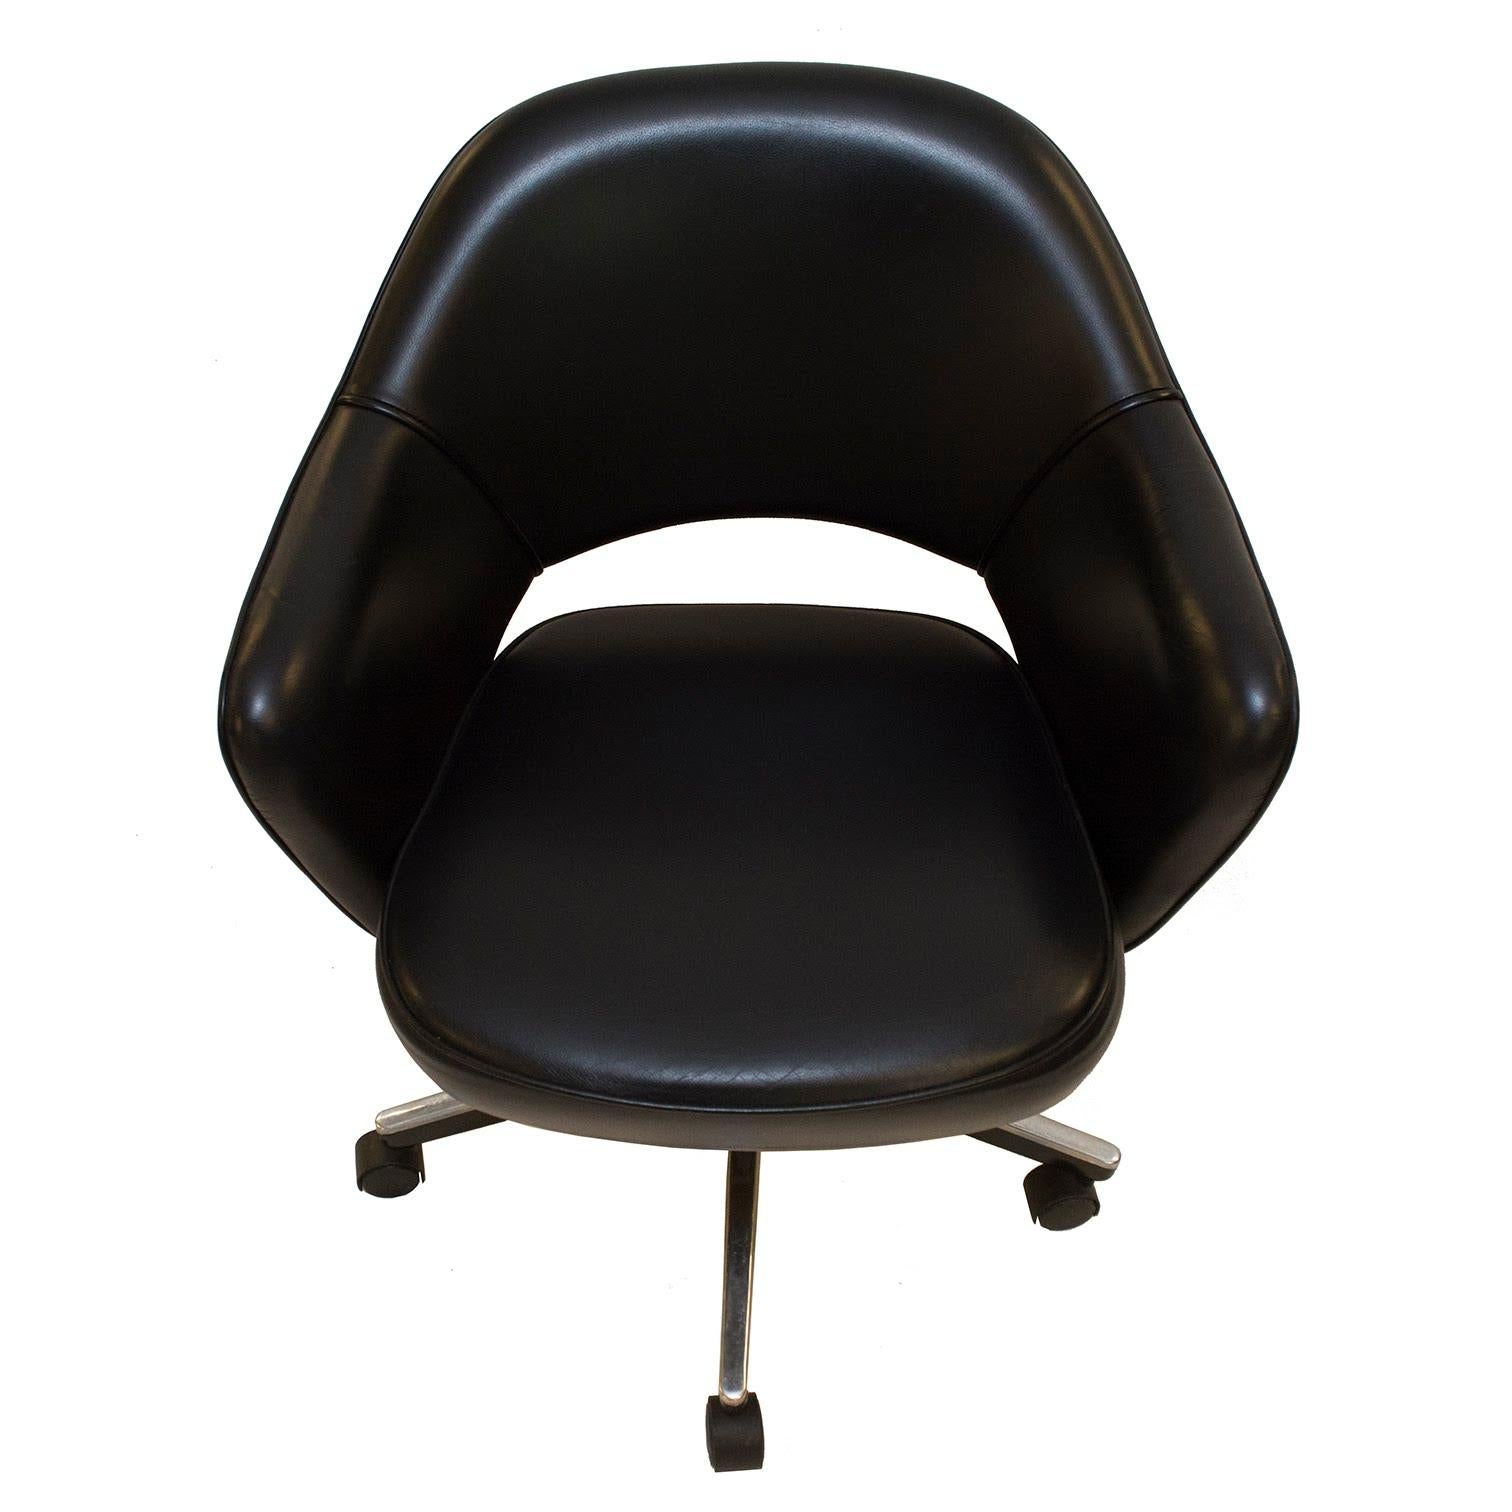 Gorgeous Knoll Saarinen office chair on a swivel base. These classic chairs come in their original supple black leather and the bases have received a thorough polish. This chair features a contemporary iteration swivel base and is equipped with